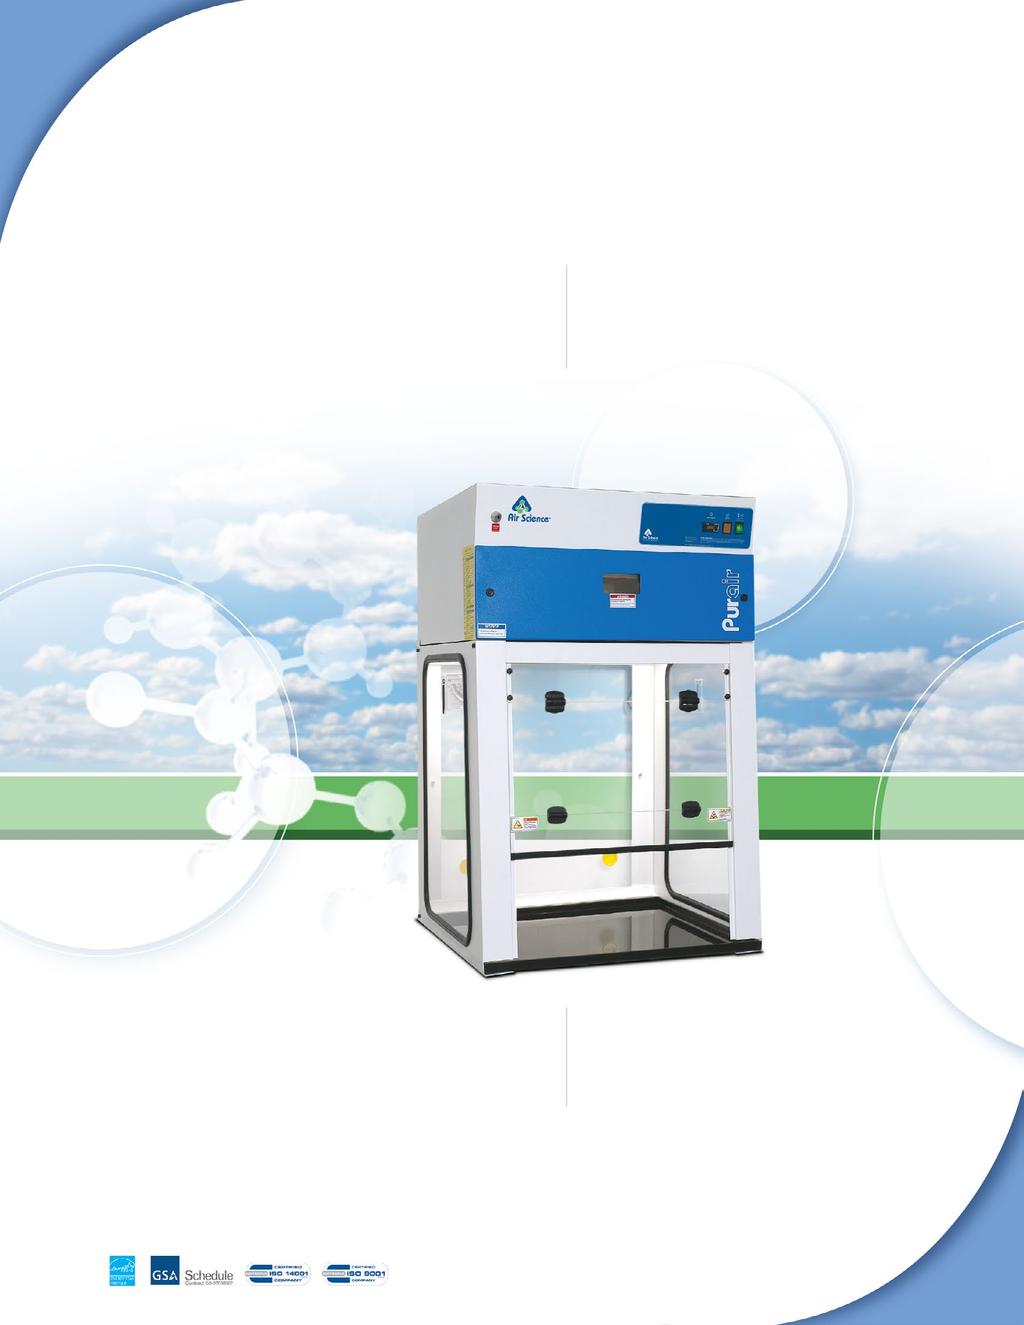 Ductless Fume Hoods The World s Most Extensive Selection of Ductless Fume Hoods.